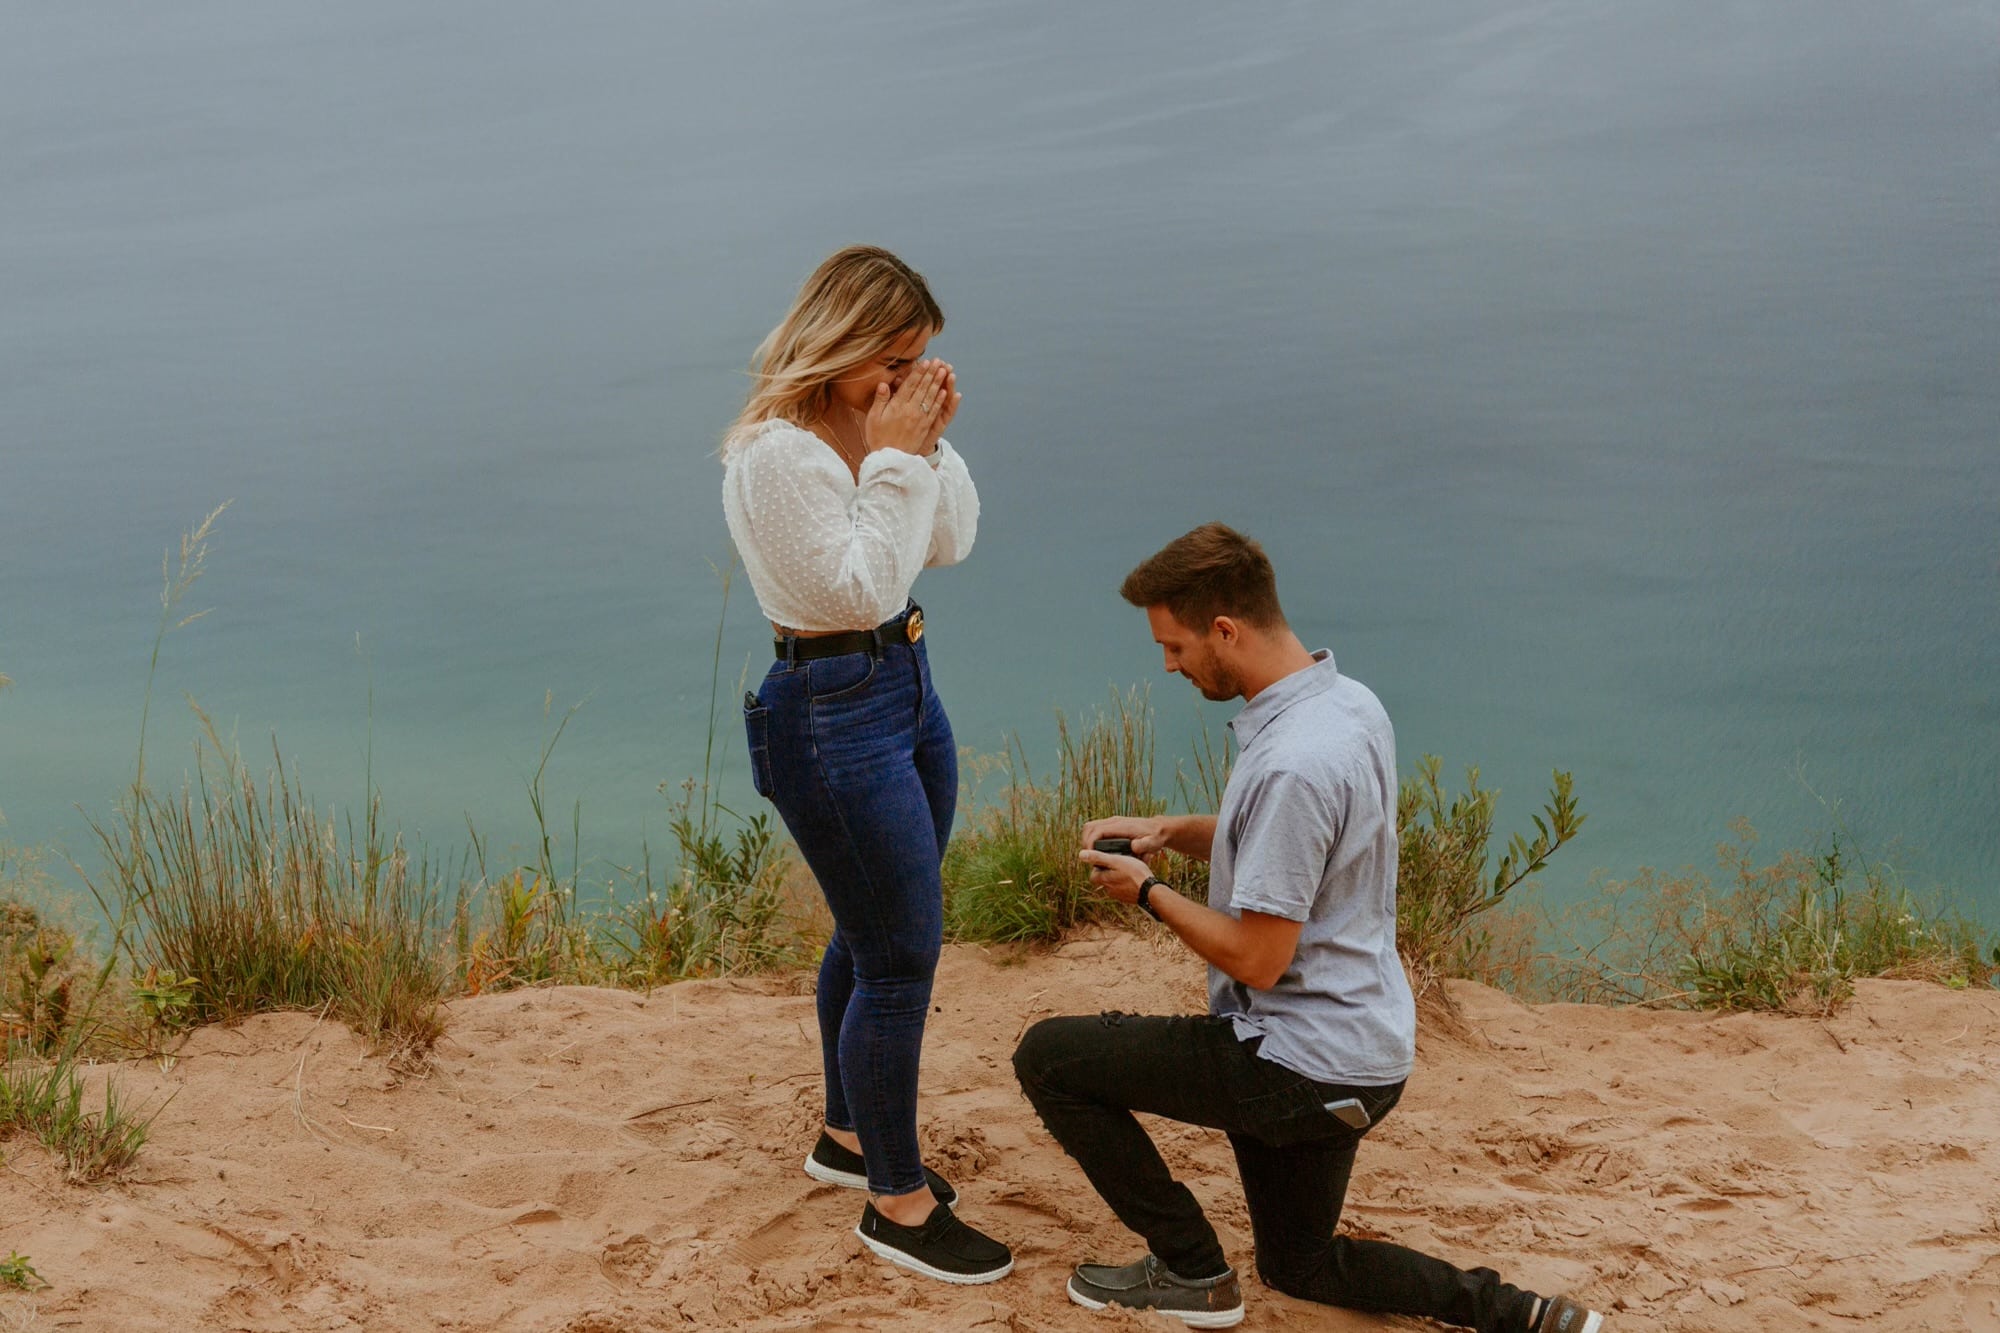 man kneels down on the ground in traverse city marriage proposal while woman stands shocked in front of him